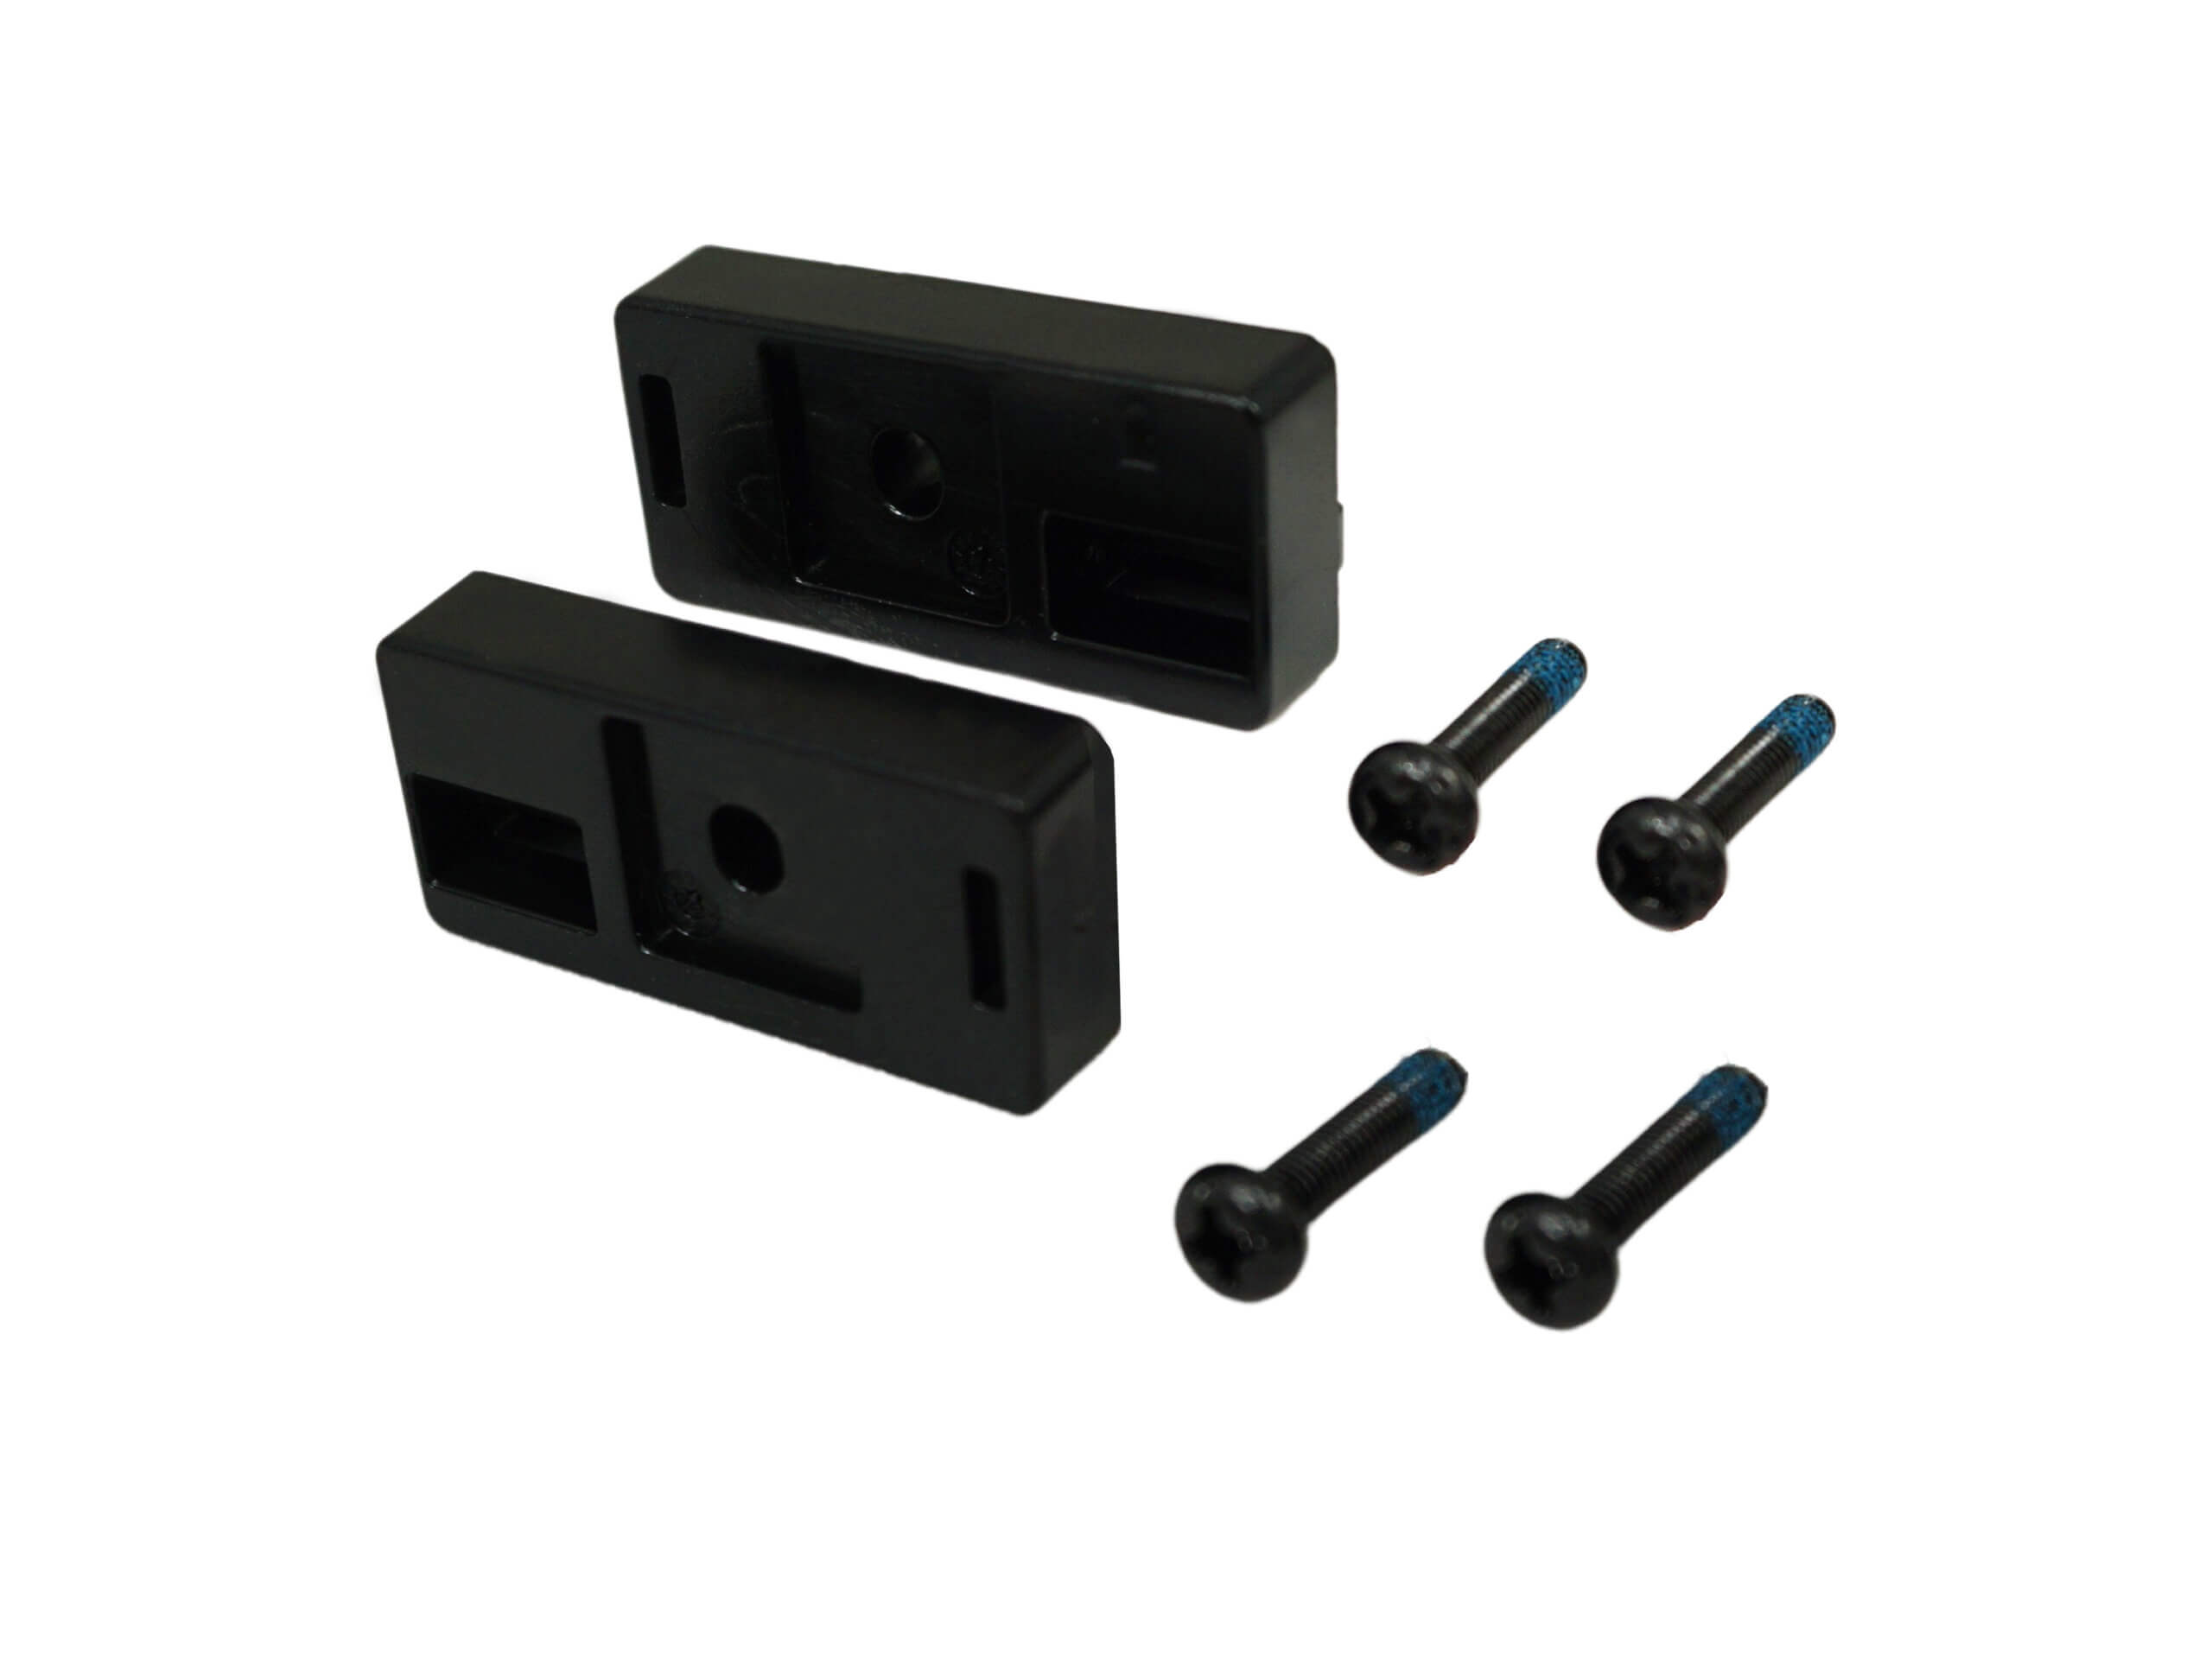 Pocket Adapter Kit for use with Havis DS-DELL-4X0 Series Docking Stations